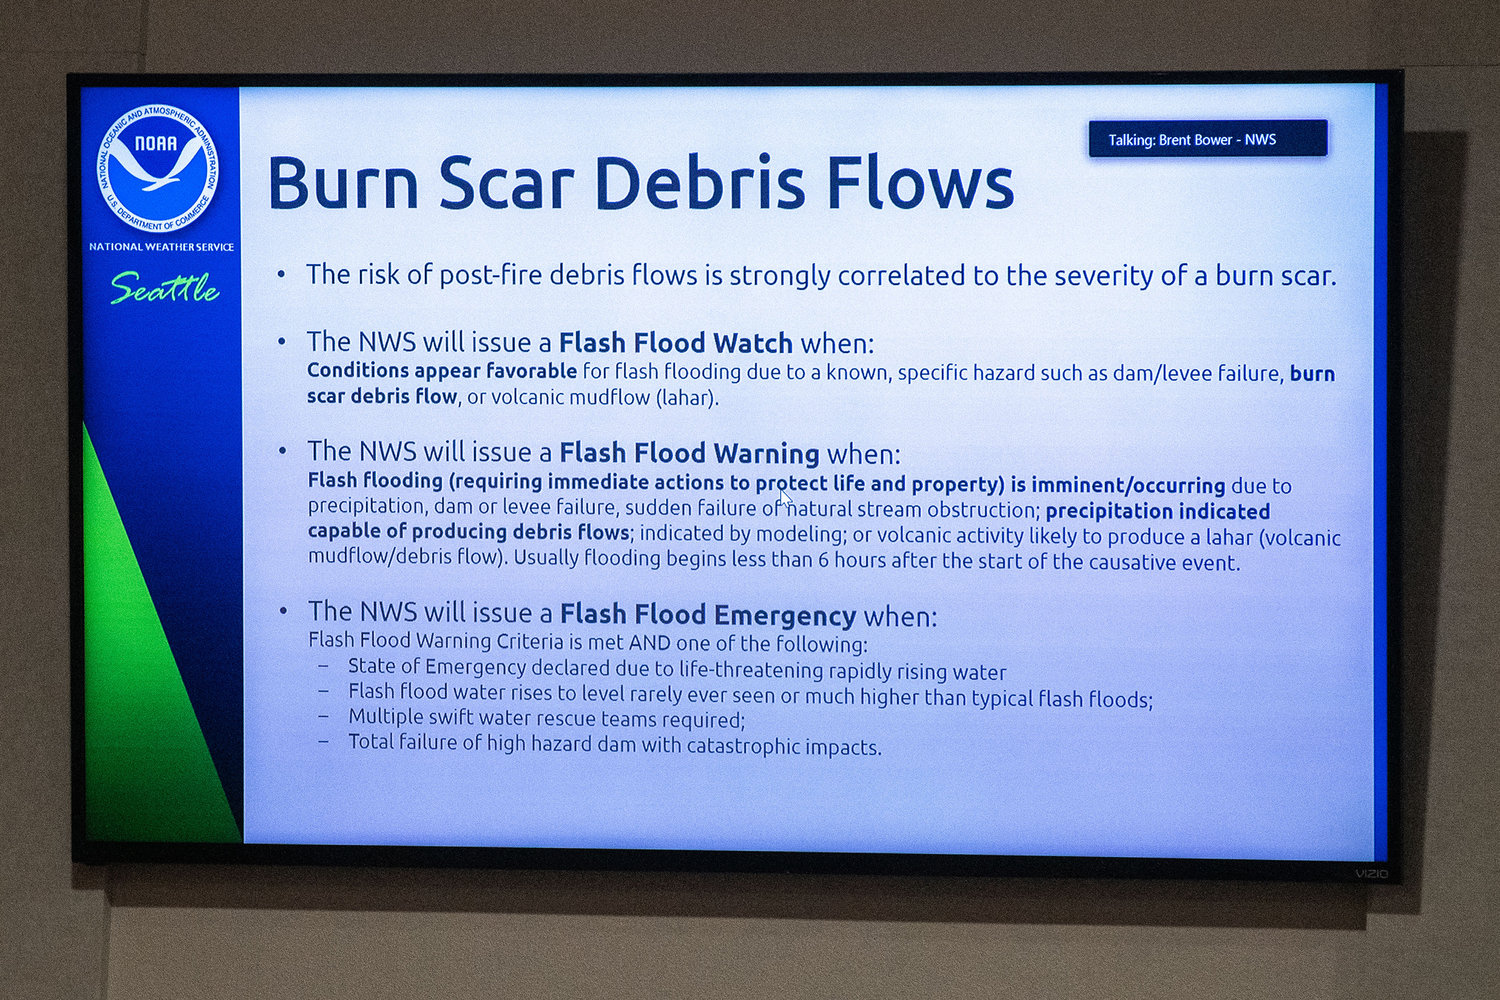 Information on Burn Scar Debris Flows was provided during the annual flood meeting held at Jester’s Auto Museum in Chehalis on Thursday.